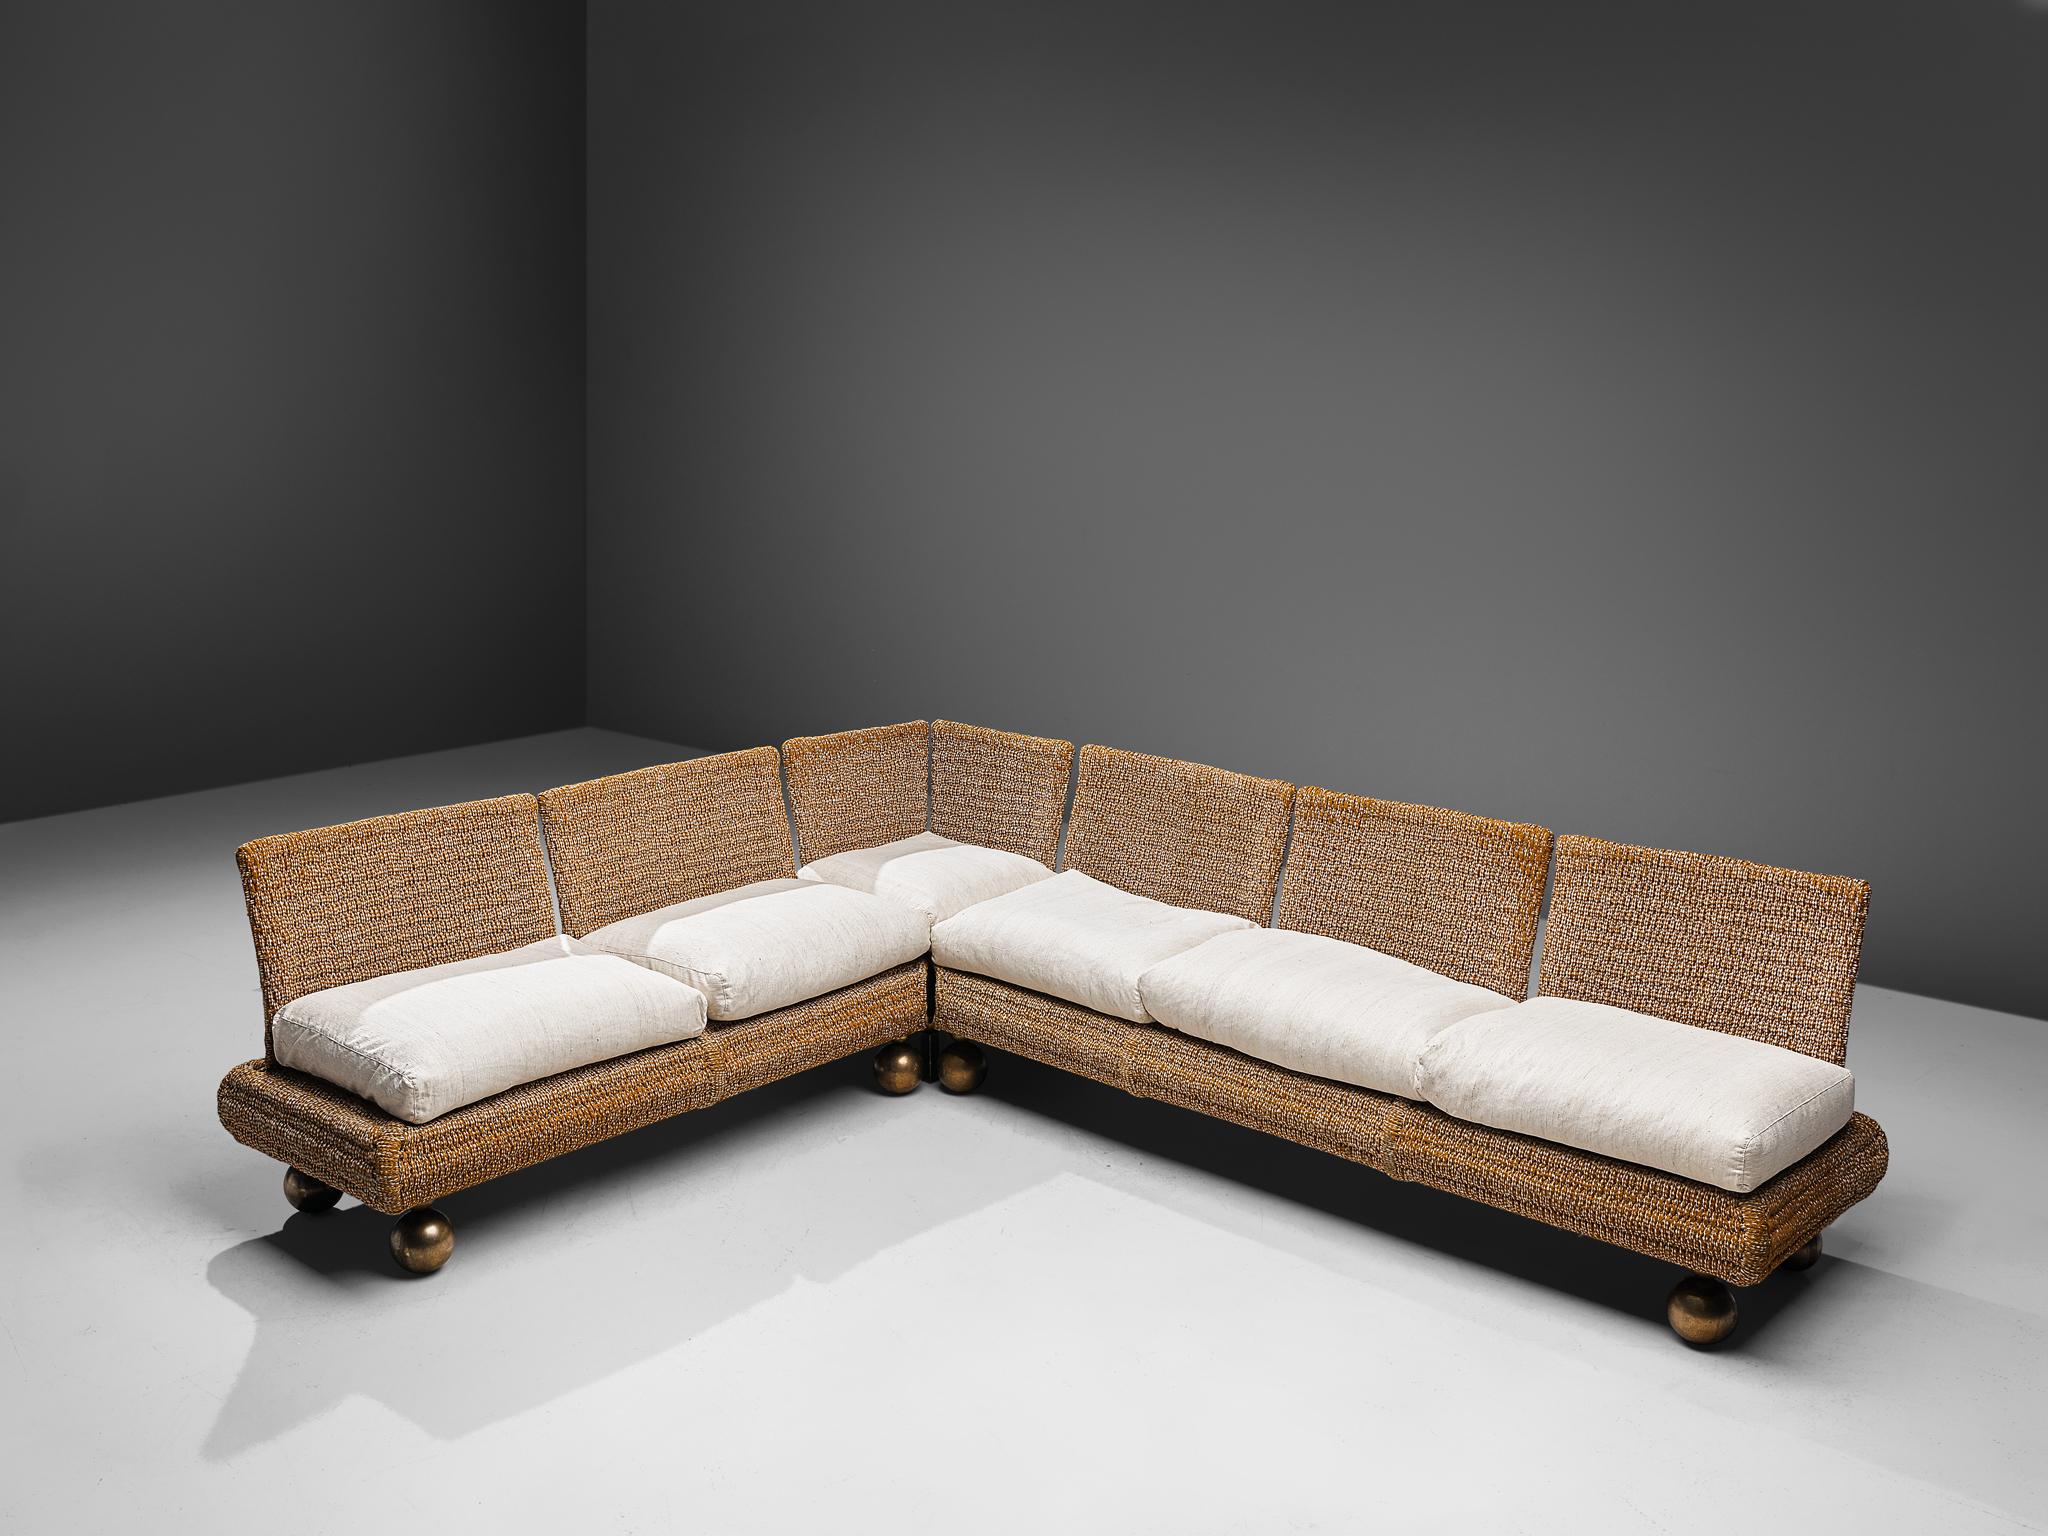 Marzio Cecchi for studio most, sectional sofa, metal, bronze, rope and upholstery, Italy, circa 1977

This large sectional sofa by Marzio Cecchi features an interesting design with a woven rope frame. It is separated in two parts, allowing the